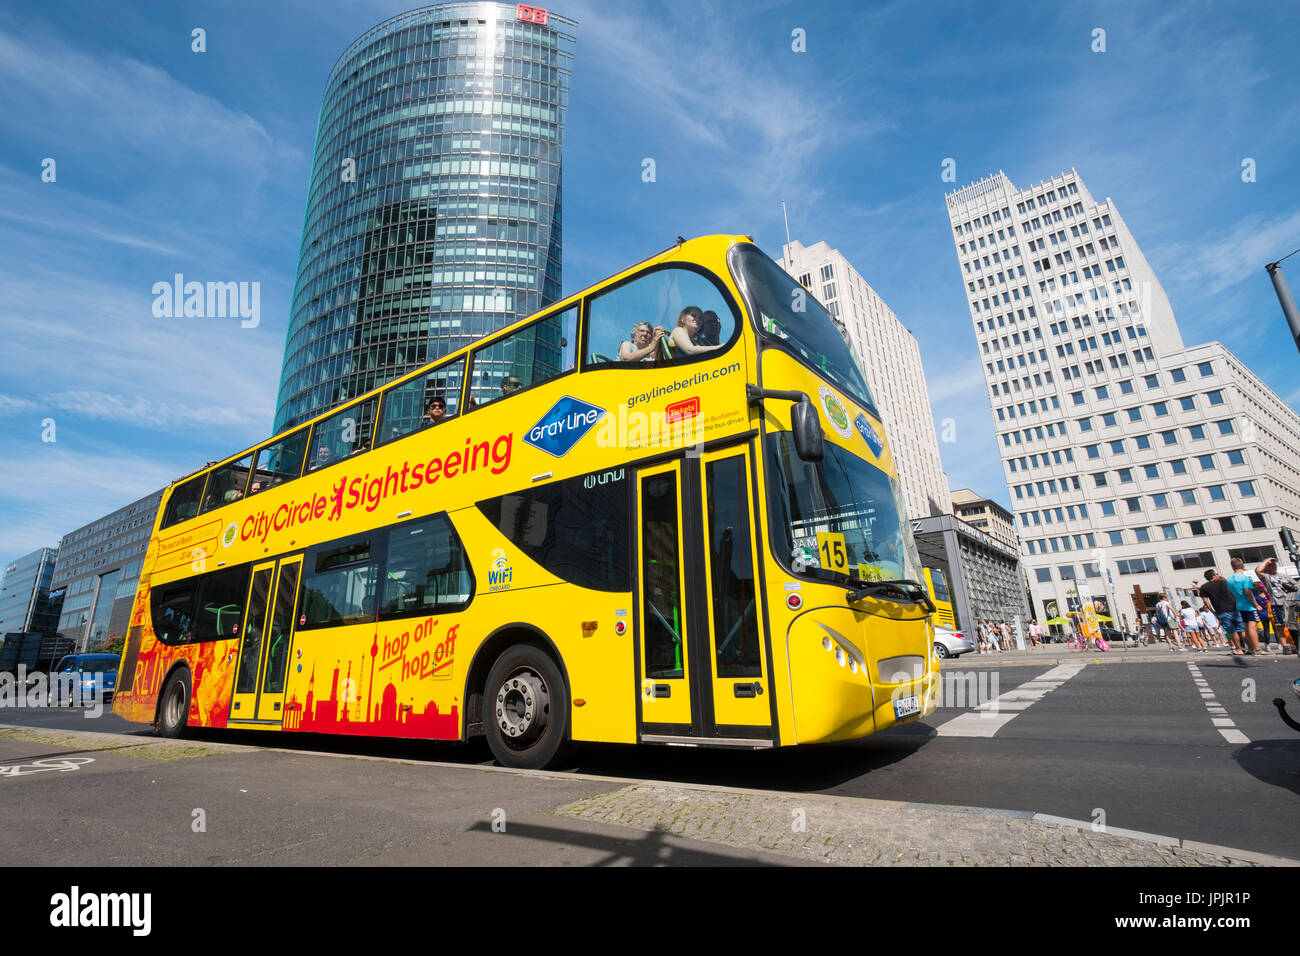 Gray Line city sightseeing tourist tour bus at Potsdamer Platz Square in Berlin, Germany Stock Photo